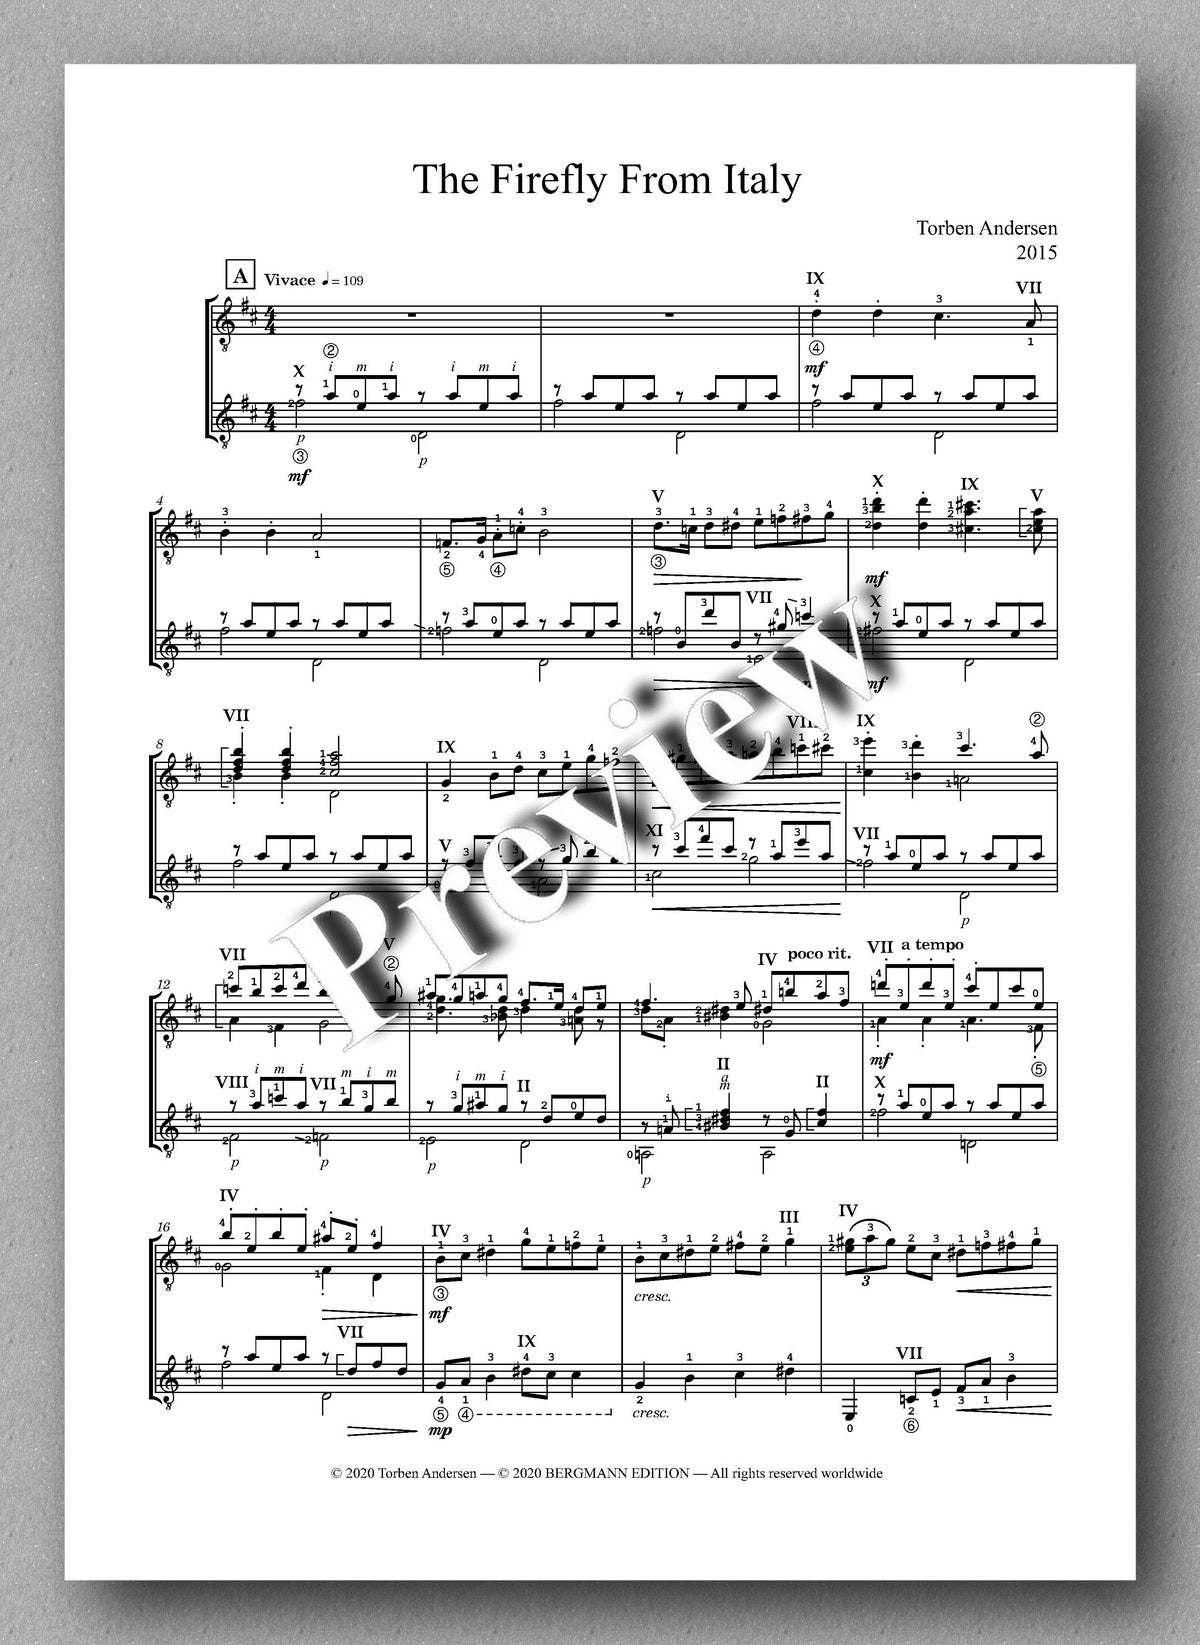 Torben Andersen, The Firefly From Italy - Music score 1